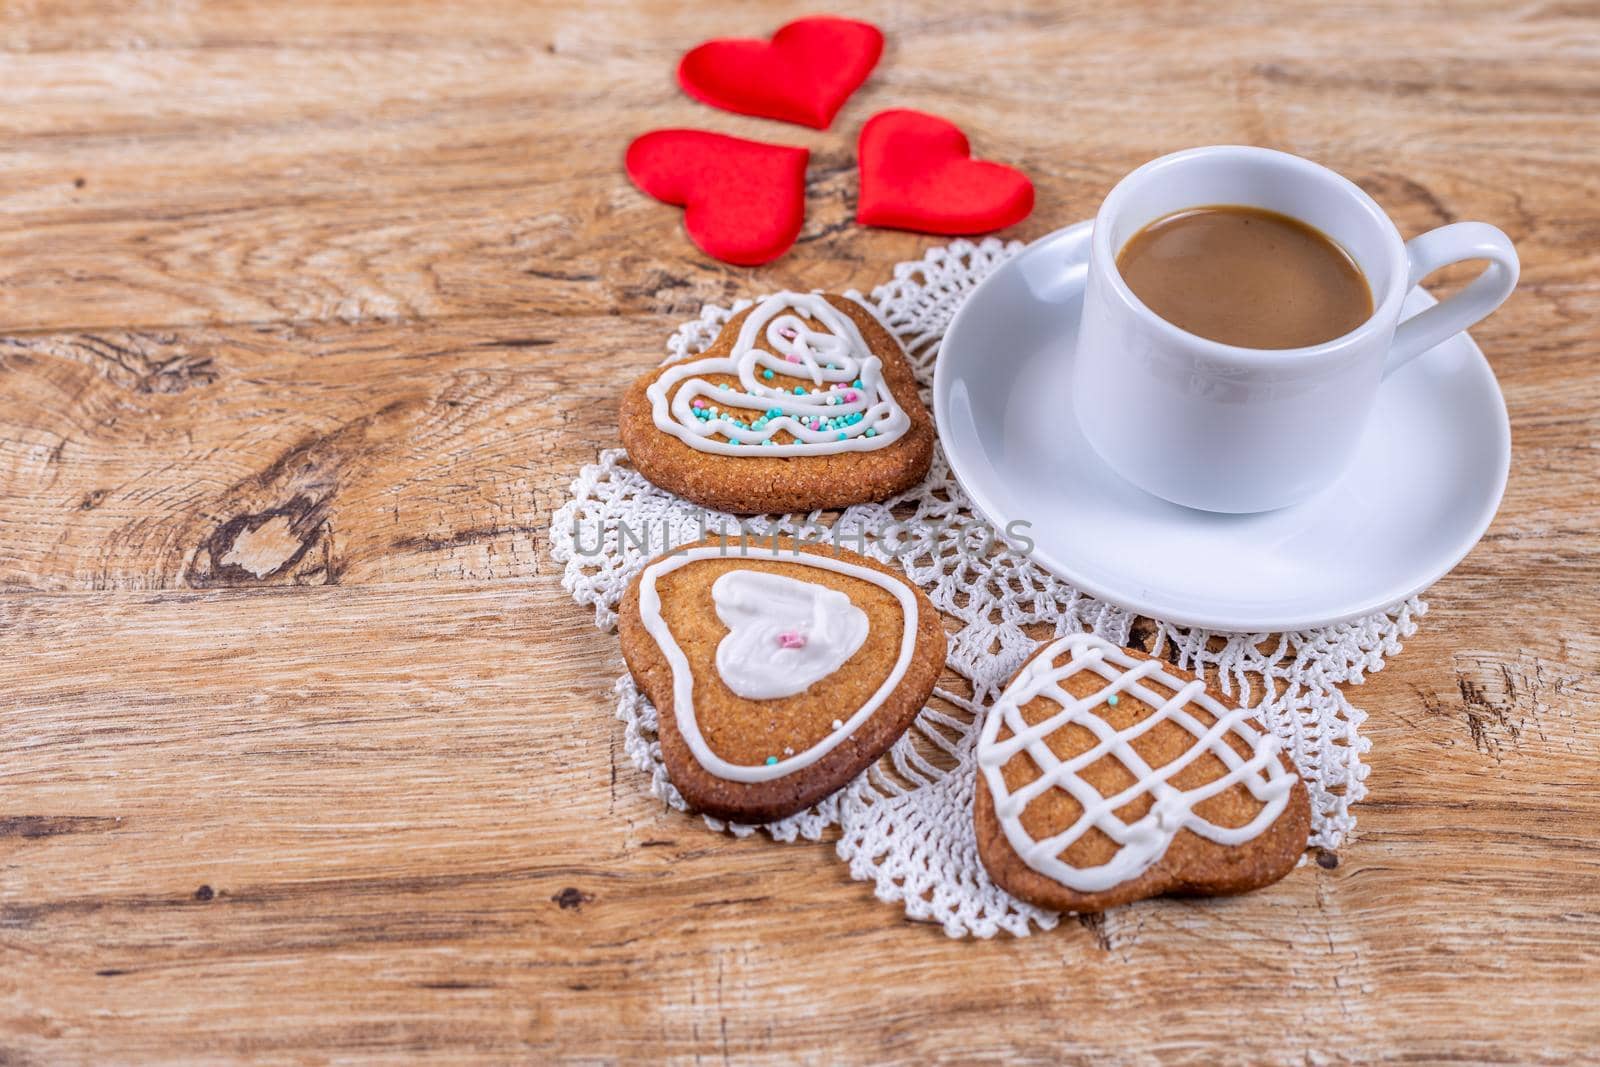 Homemade heart-shaped cookies, decorated with white icing with decorative sprinkles, and red hearts on a wooden table with a cup of coffee, top and side view.